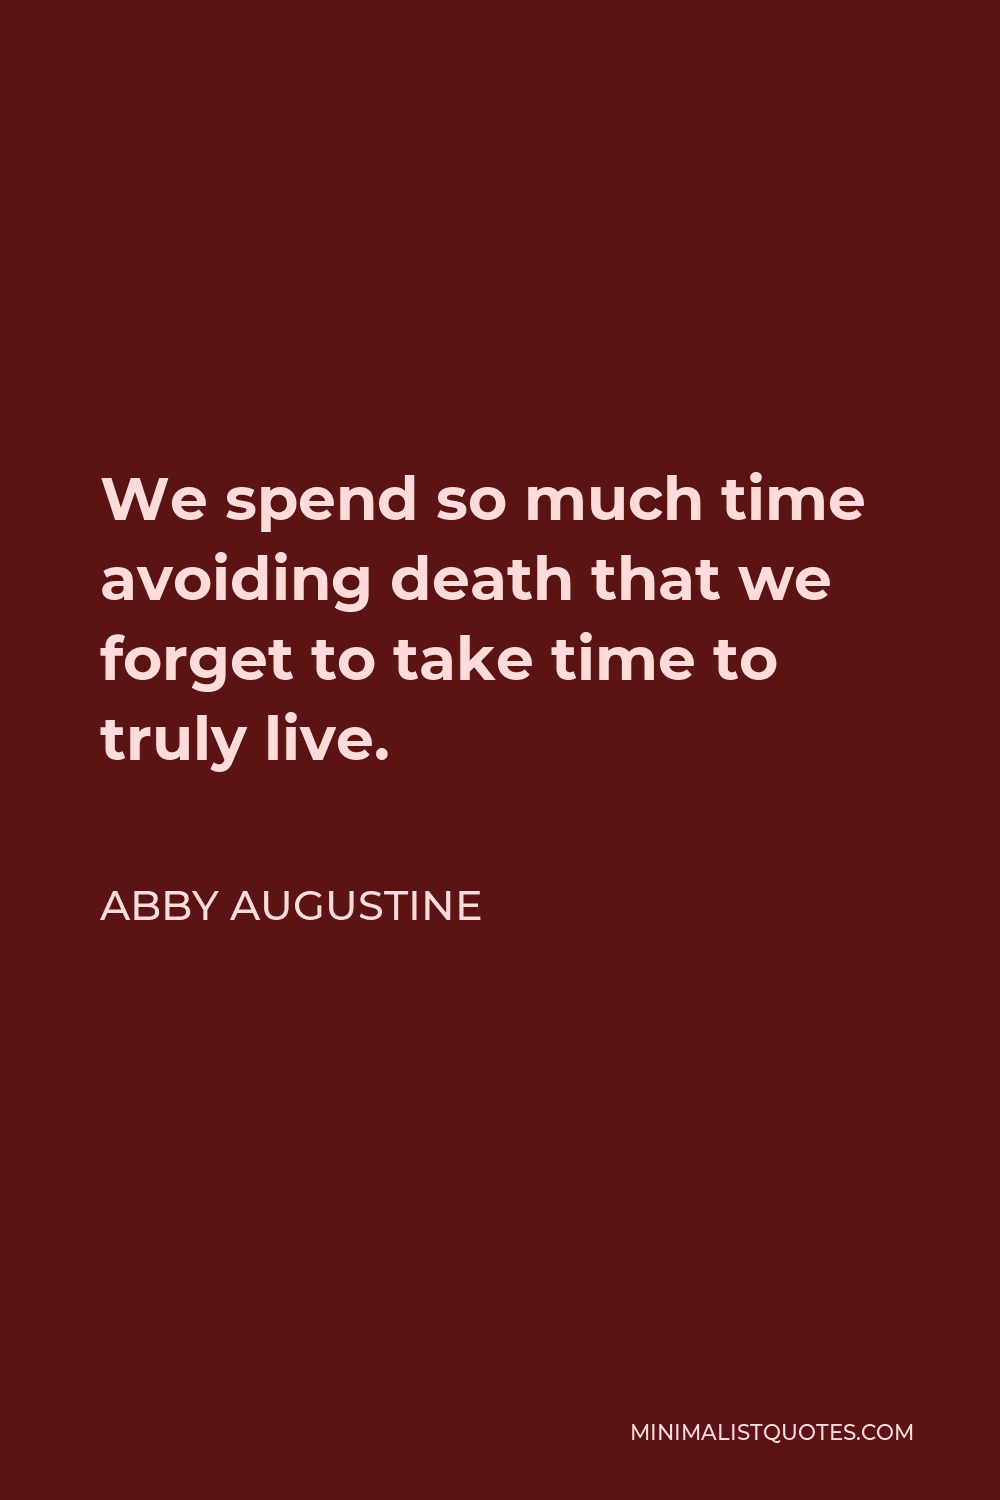 Abby Augustine Quote - We spend so much time avoiding death that we forget to take time to truly live.